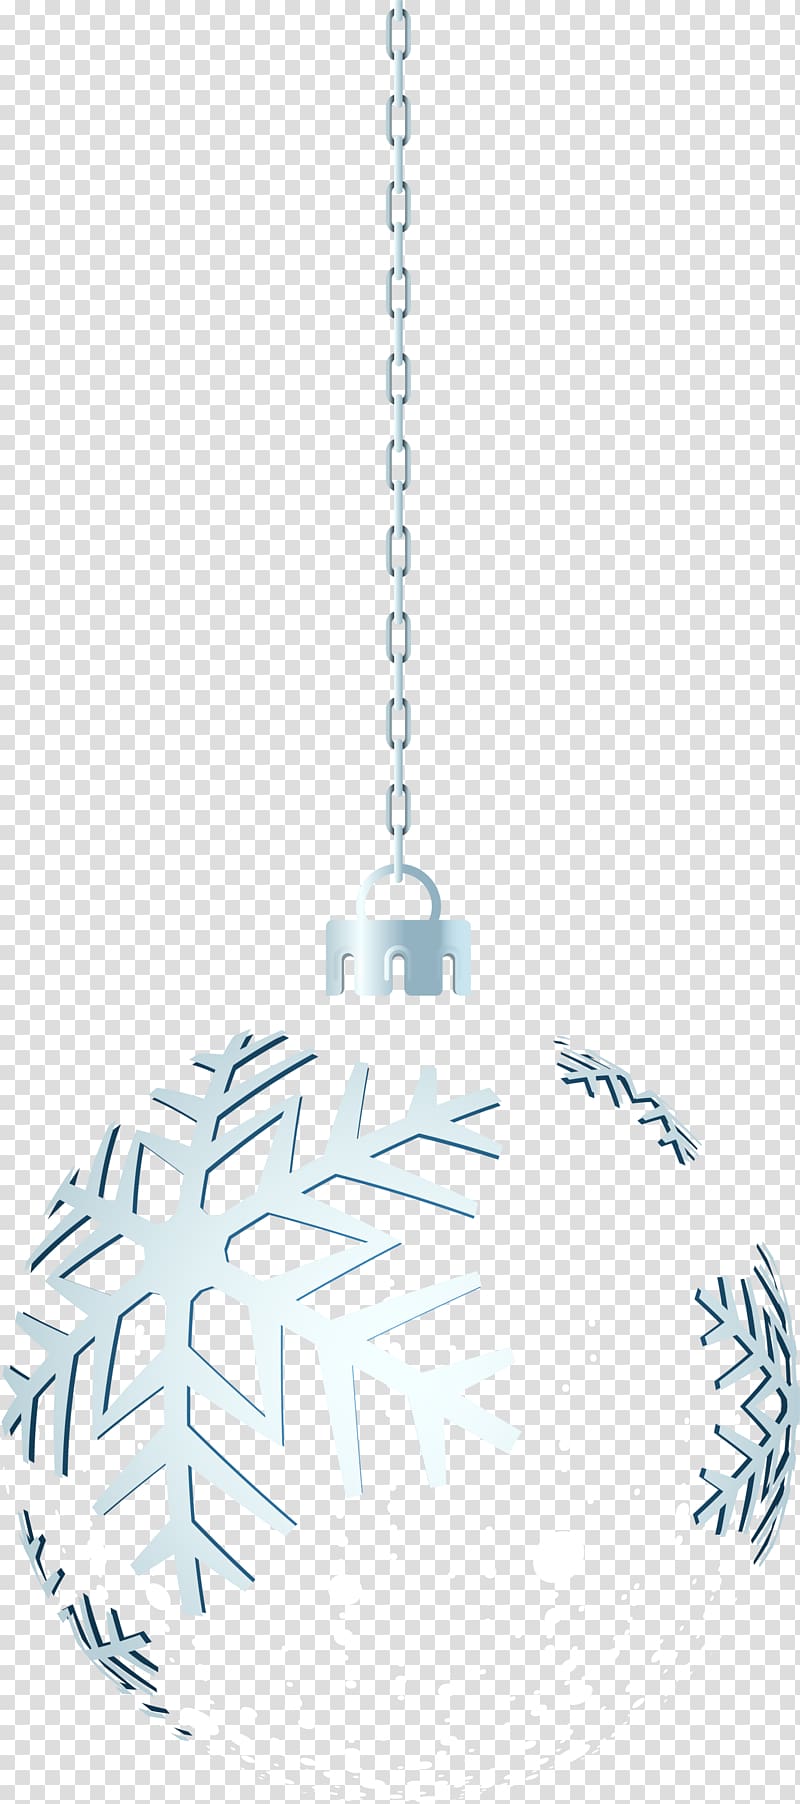 Christmas Computer file, Silver Christmas ornaments transparent background PNG clipart